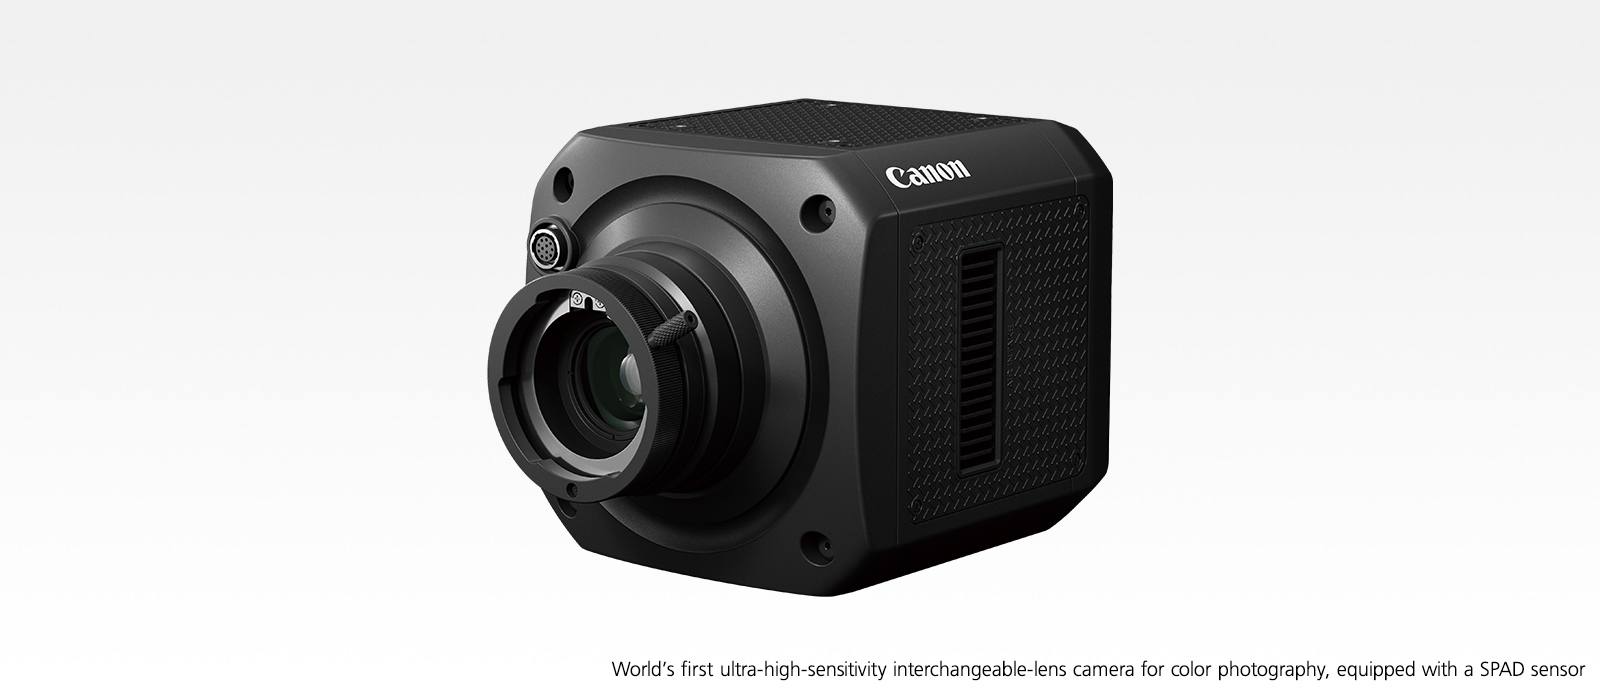 World’s first ultra-high-sensitivity interchangeable-lens camera for color photography, equipped with a SPAD sensor